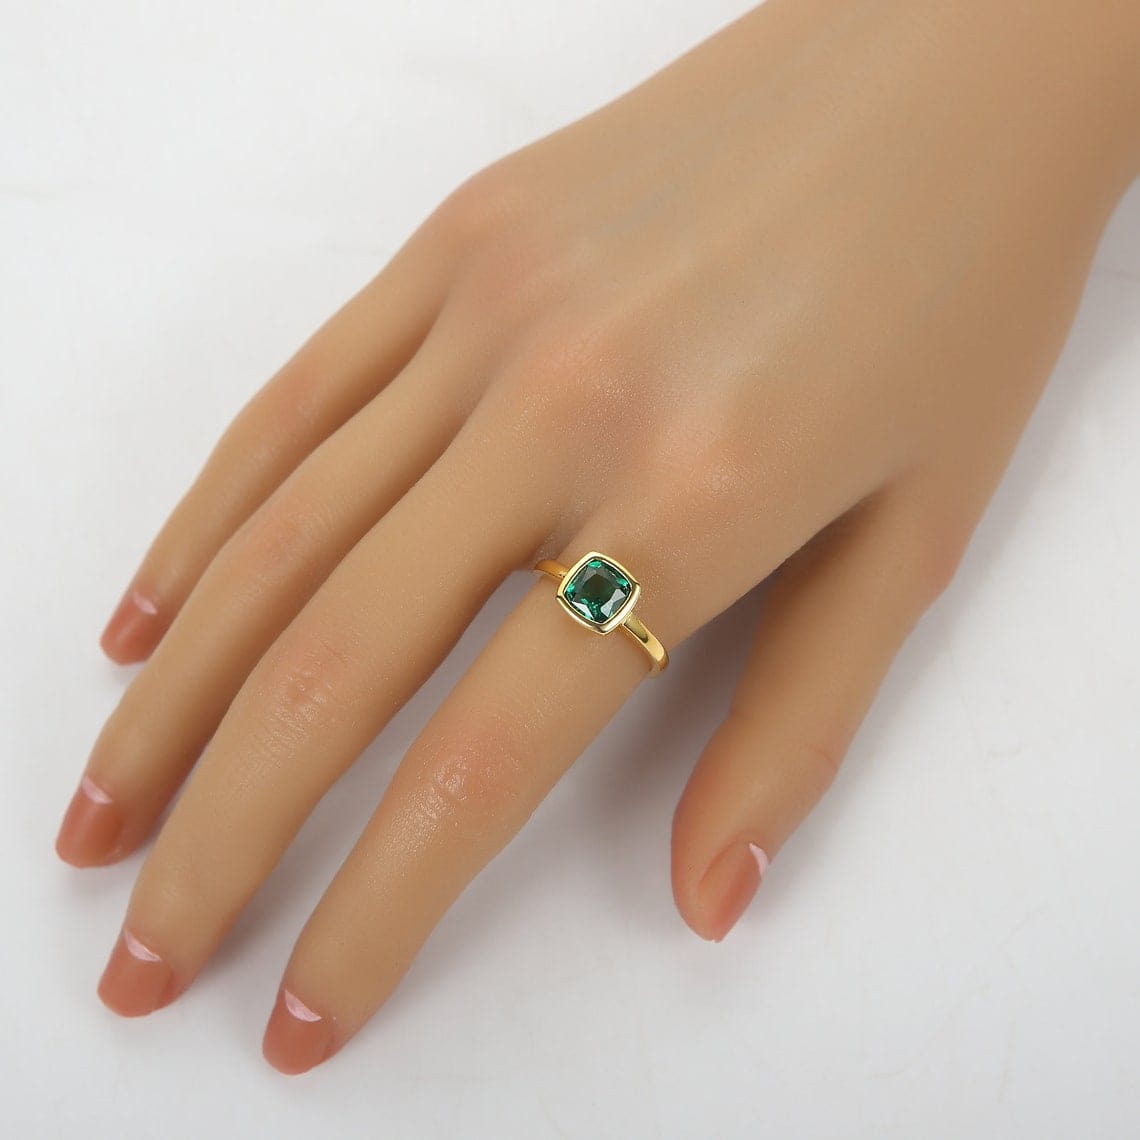 Bieauli Jewellery London emerald ring Vintage Emerald Engagement Ring - Gold Plated Sterling Silver